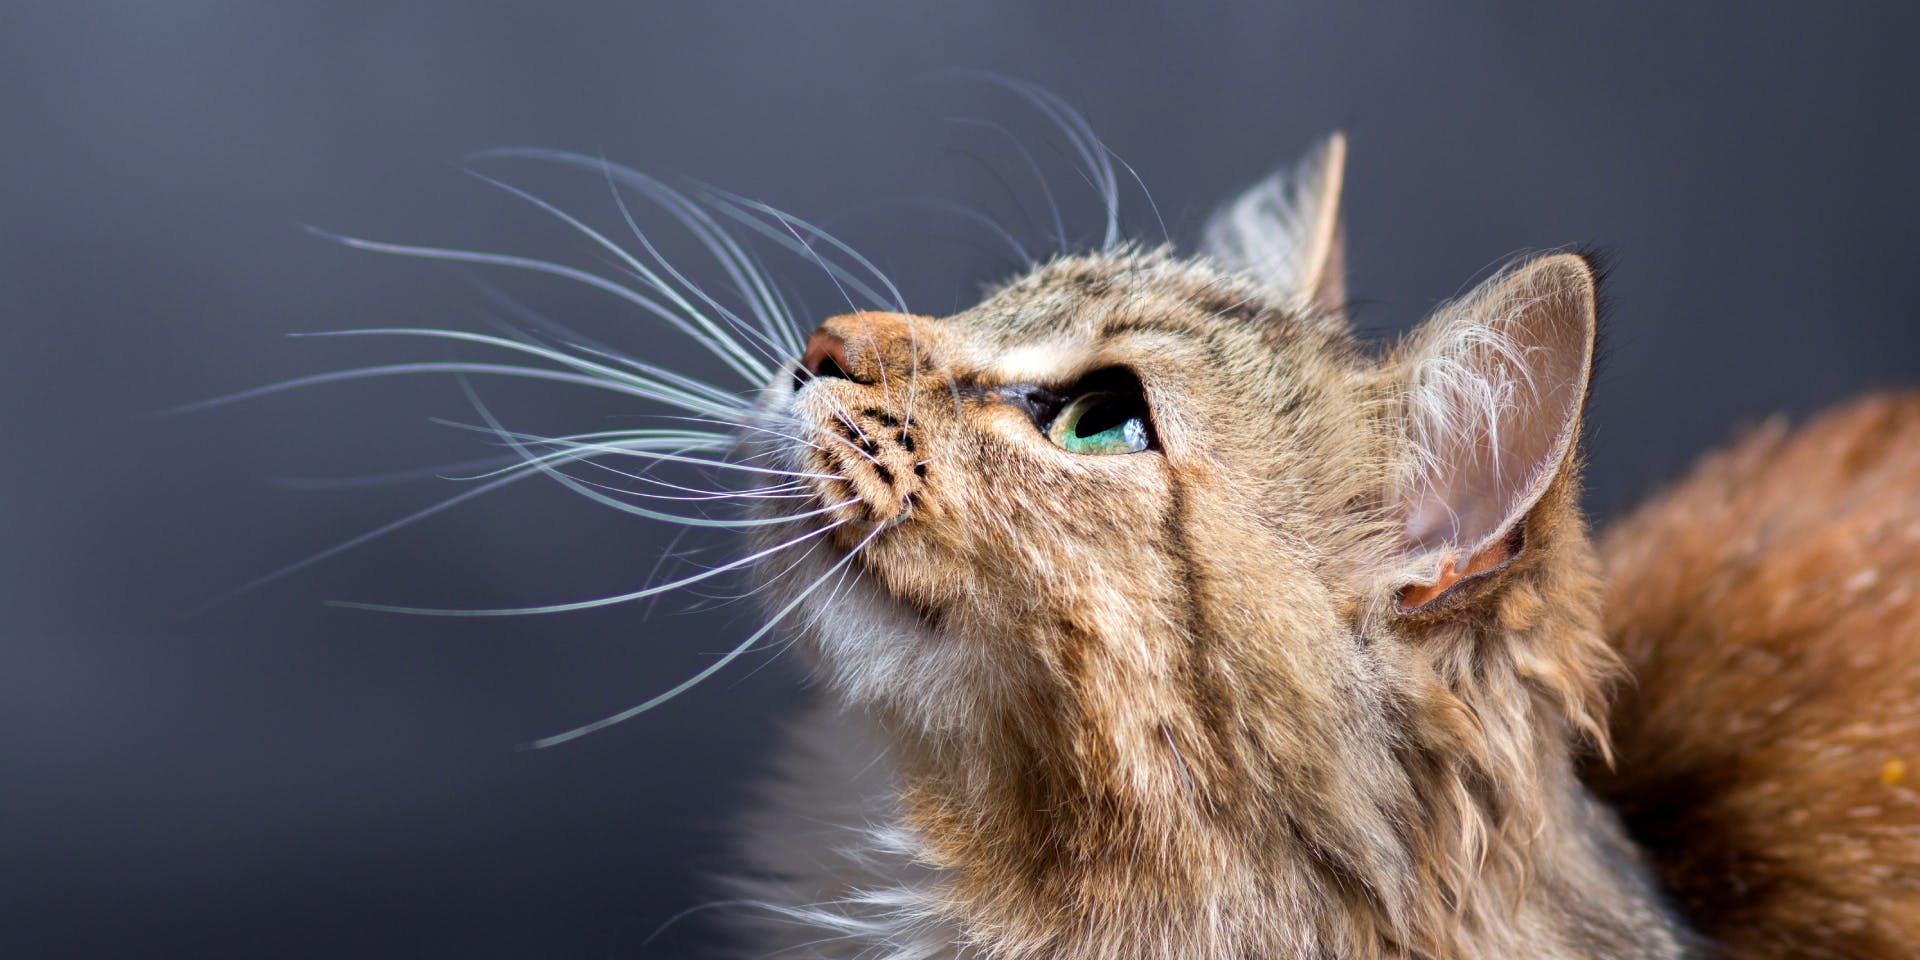 A long-haired tabby cat looking upwards.